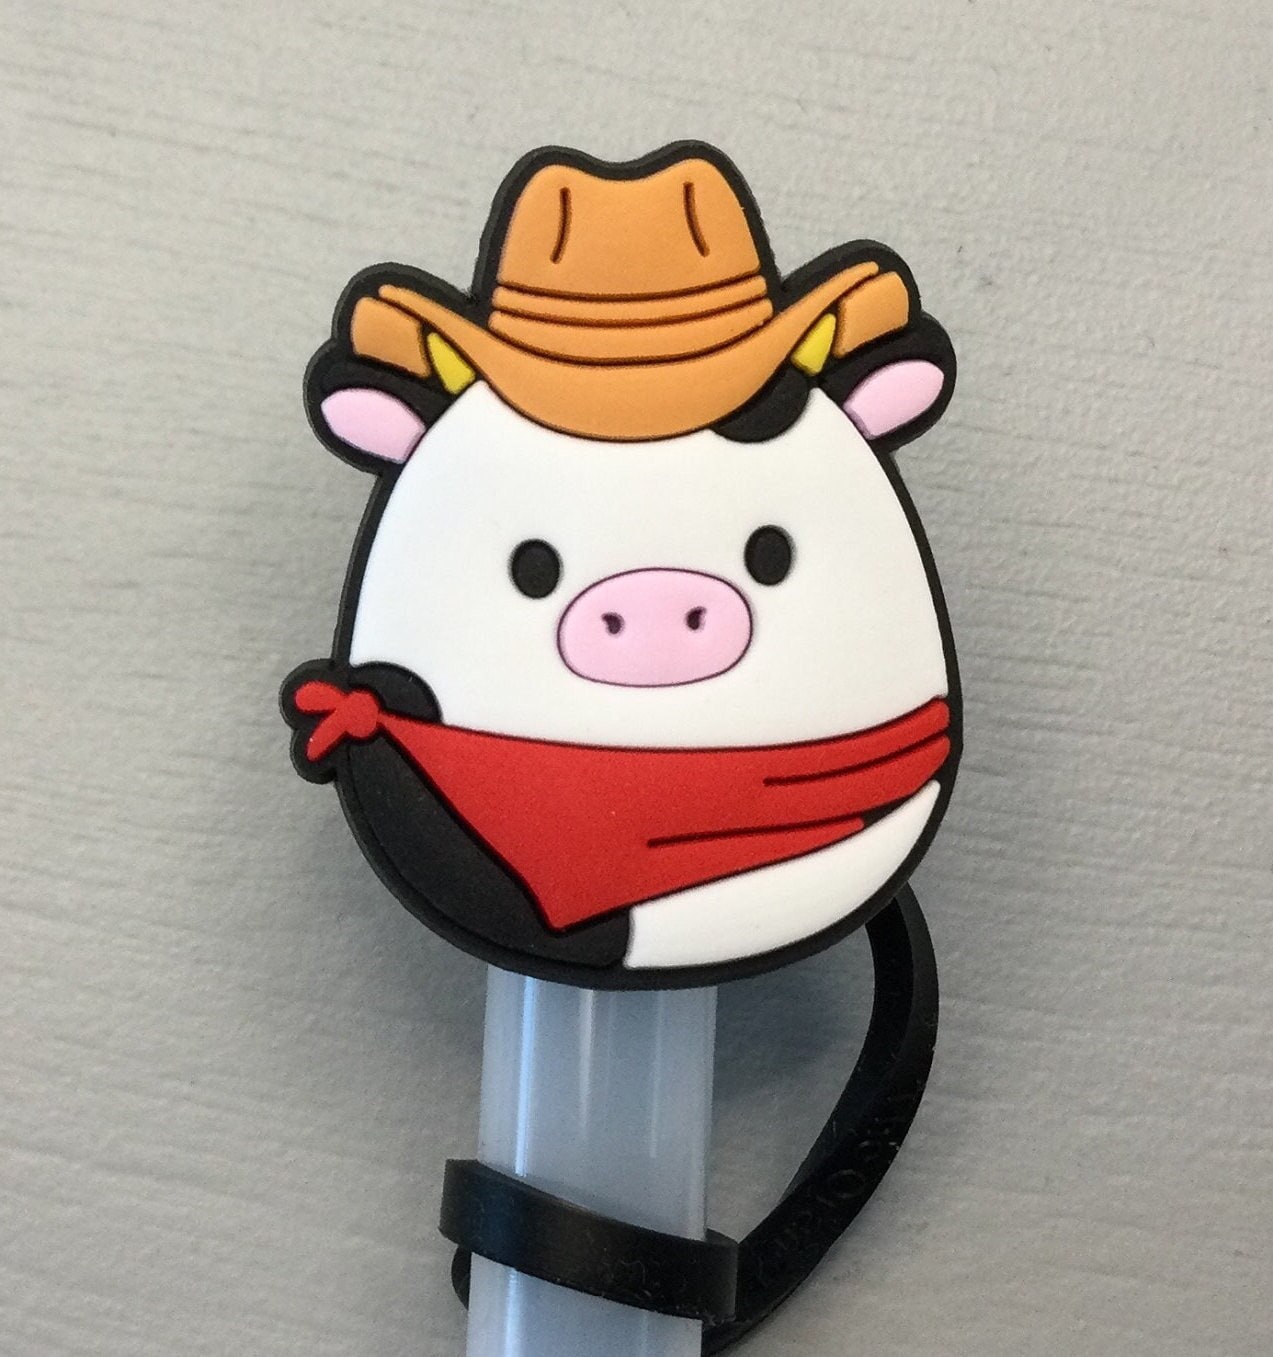 Cowboy squishmallow straw topper fits Stanley